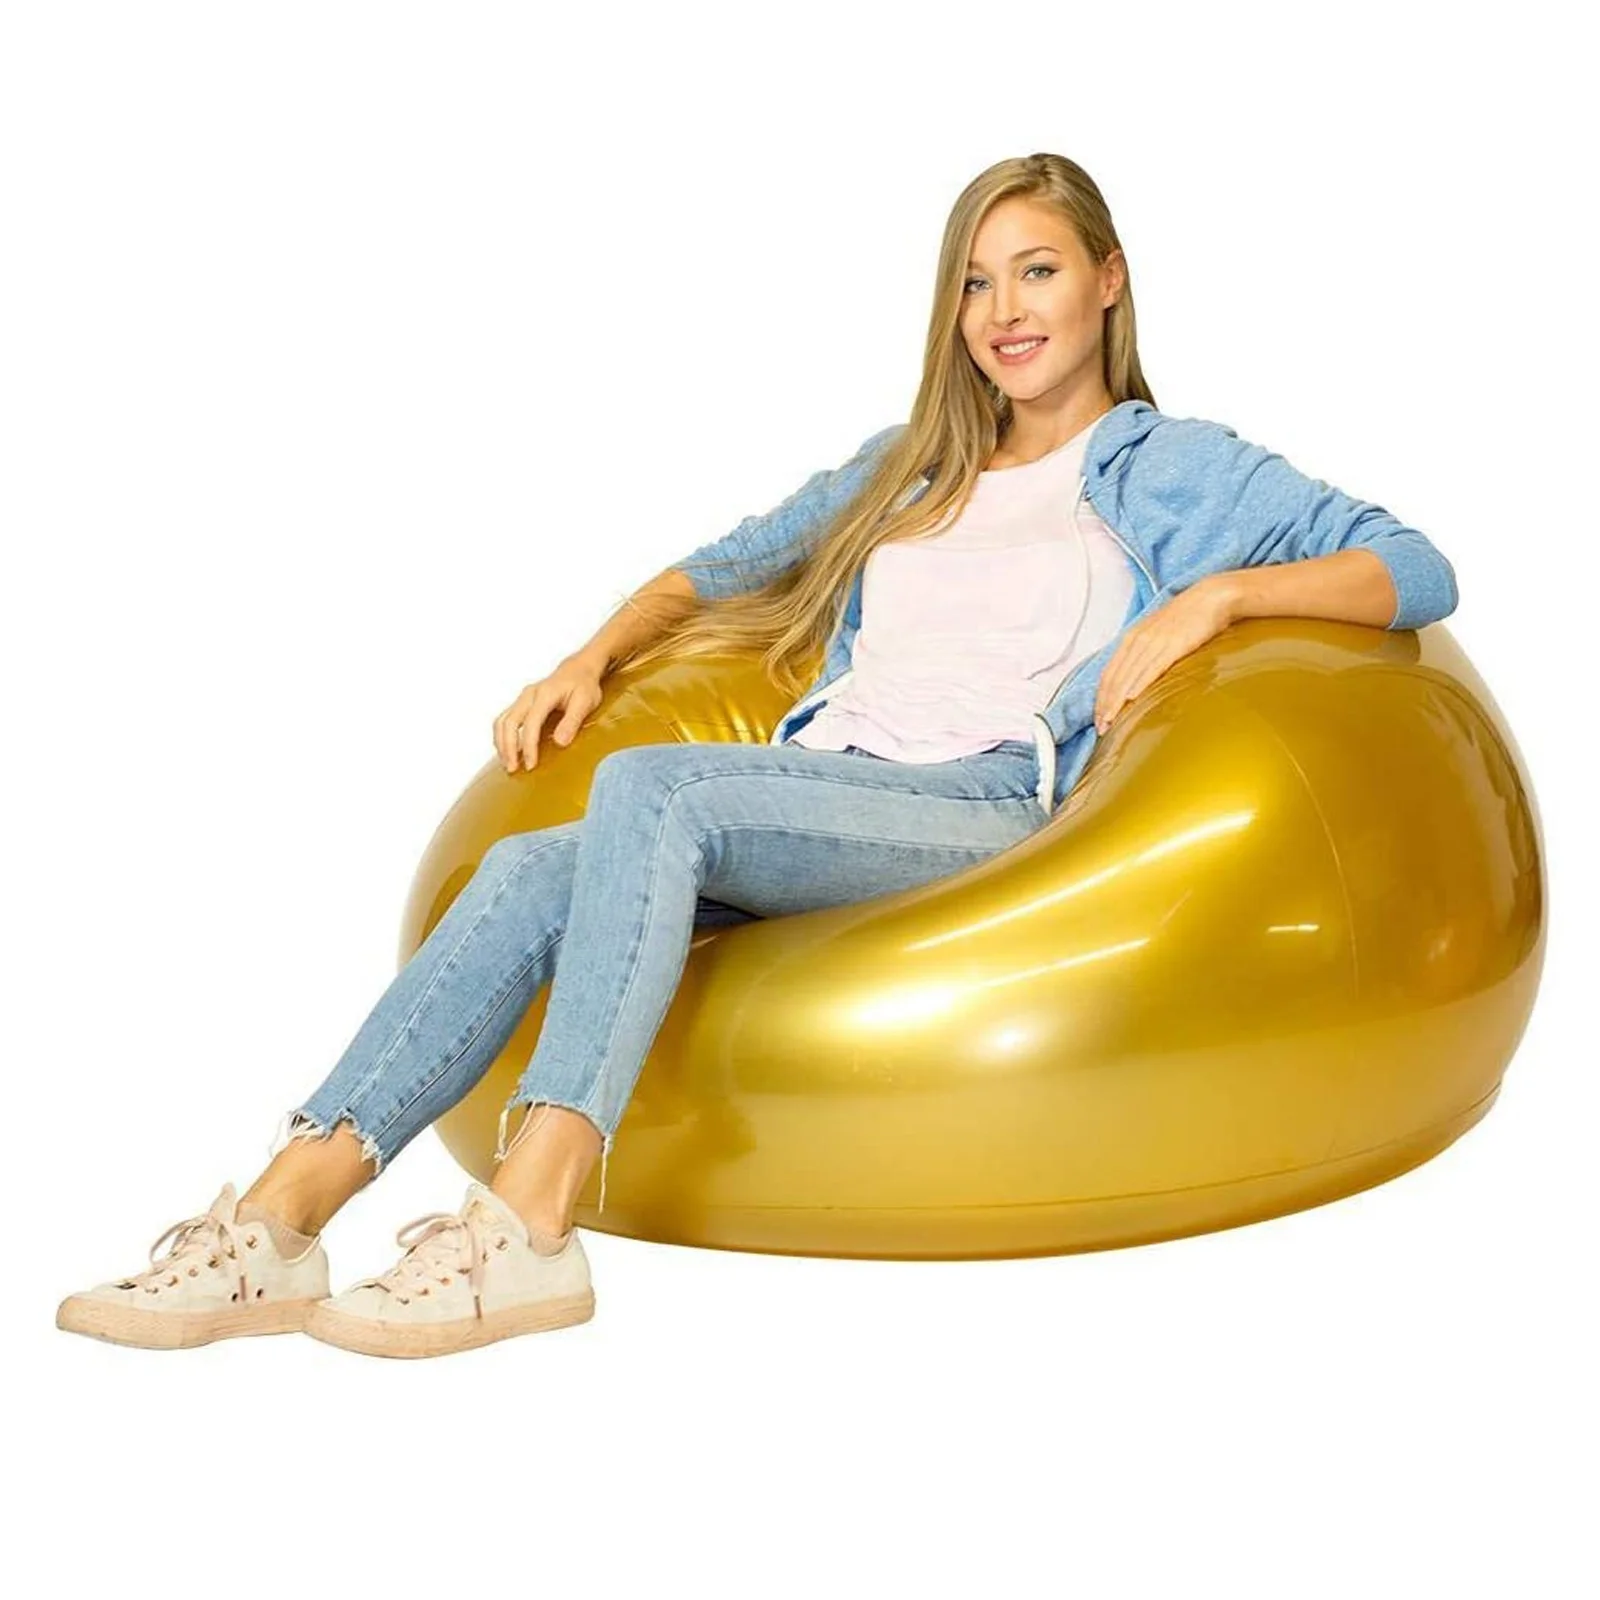 Metallic Gold Air Candy Chair Inflatable Sofa Chair Outdoor